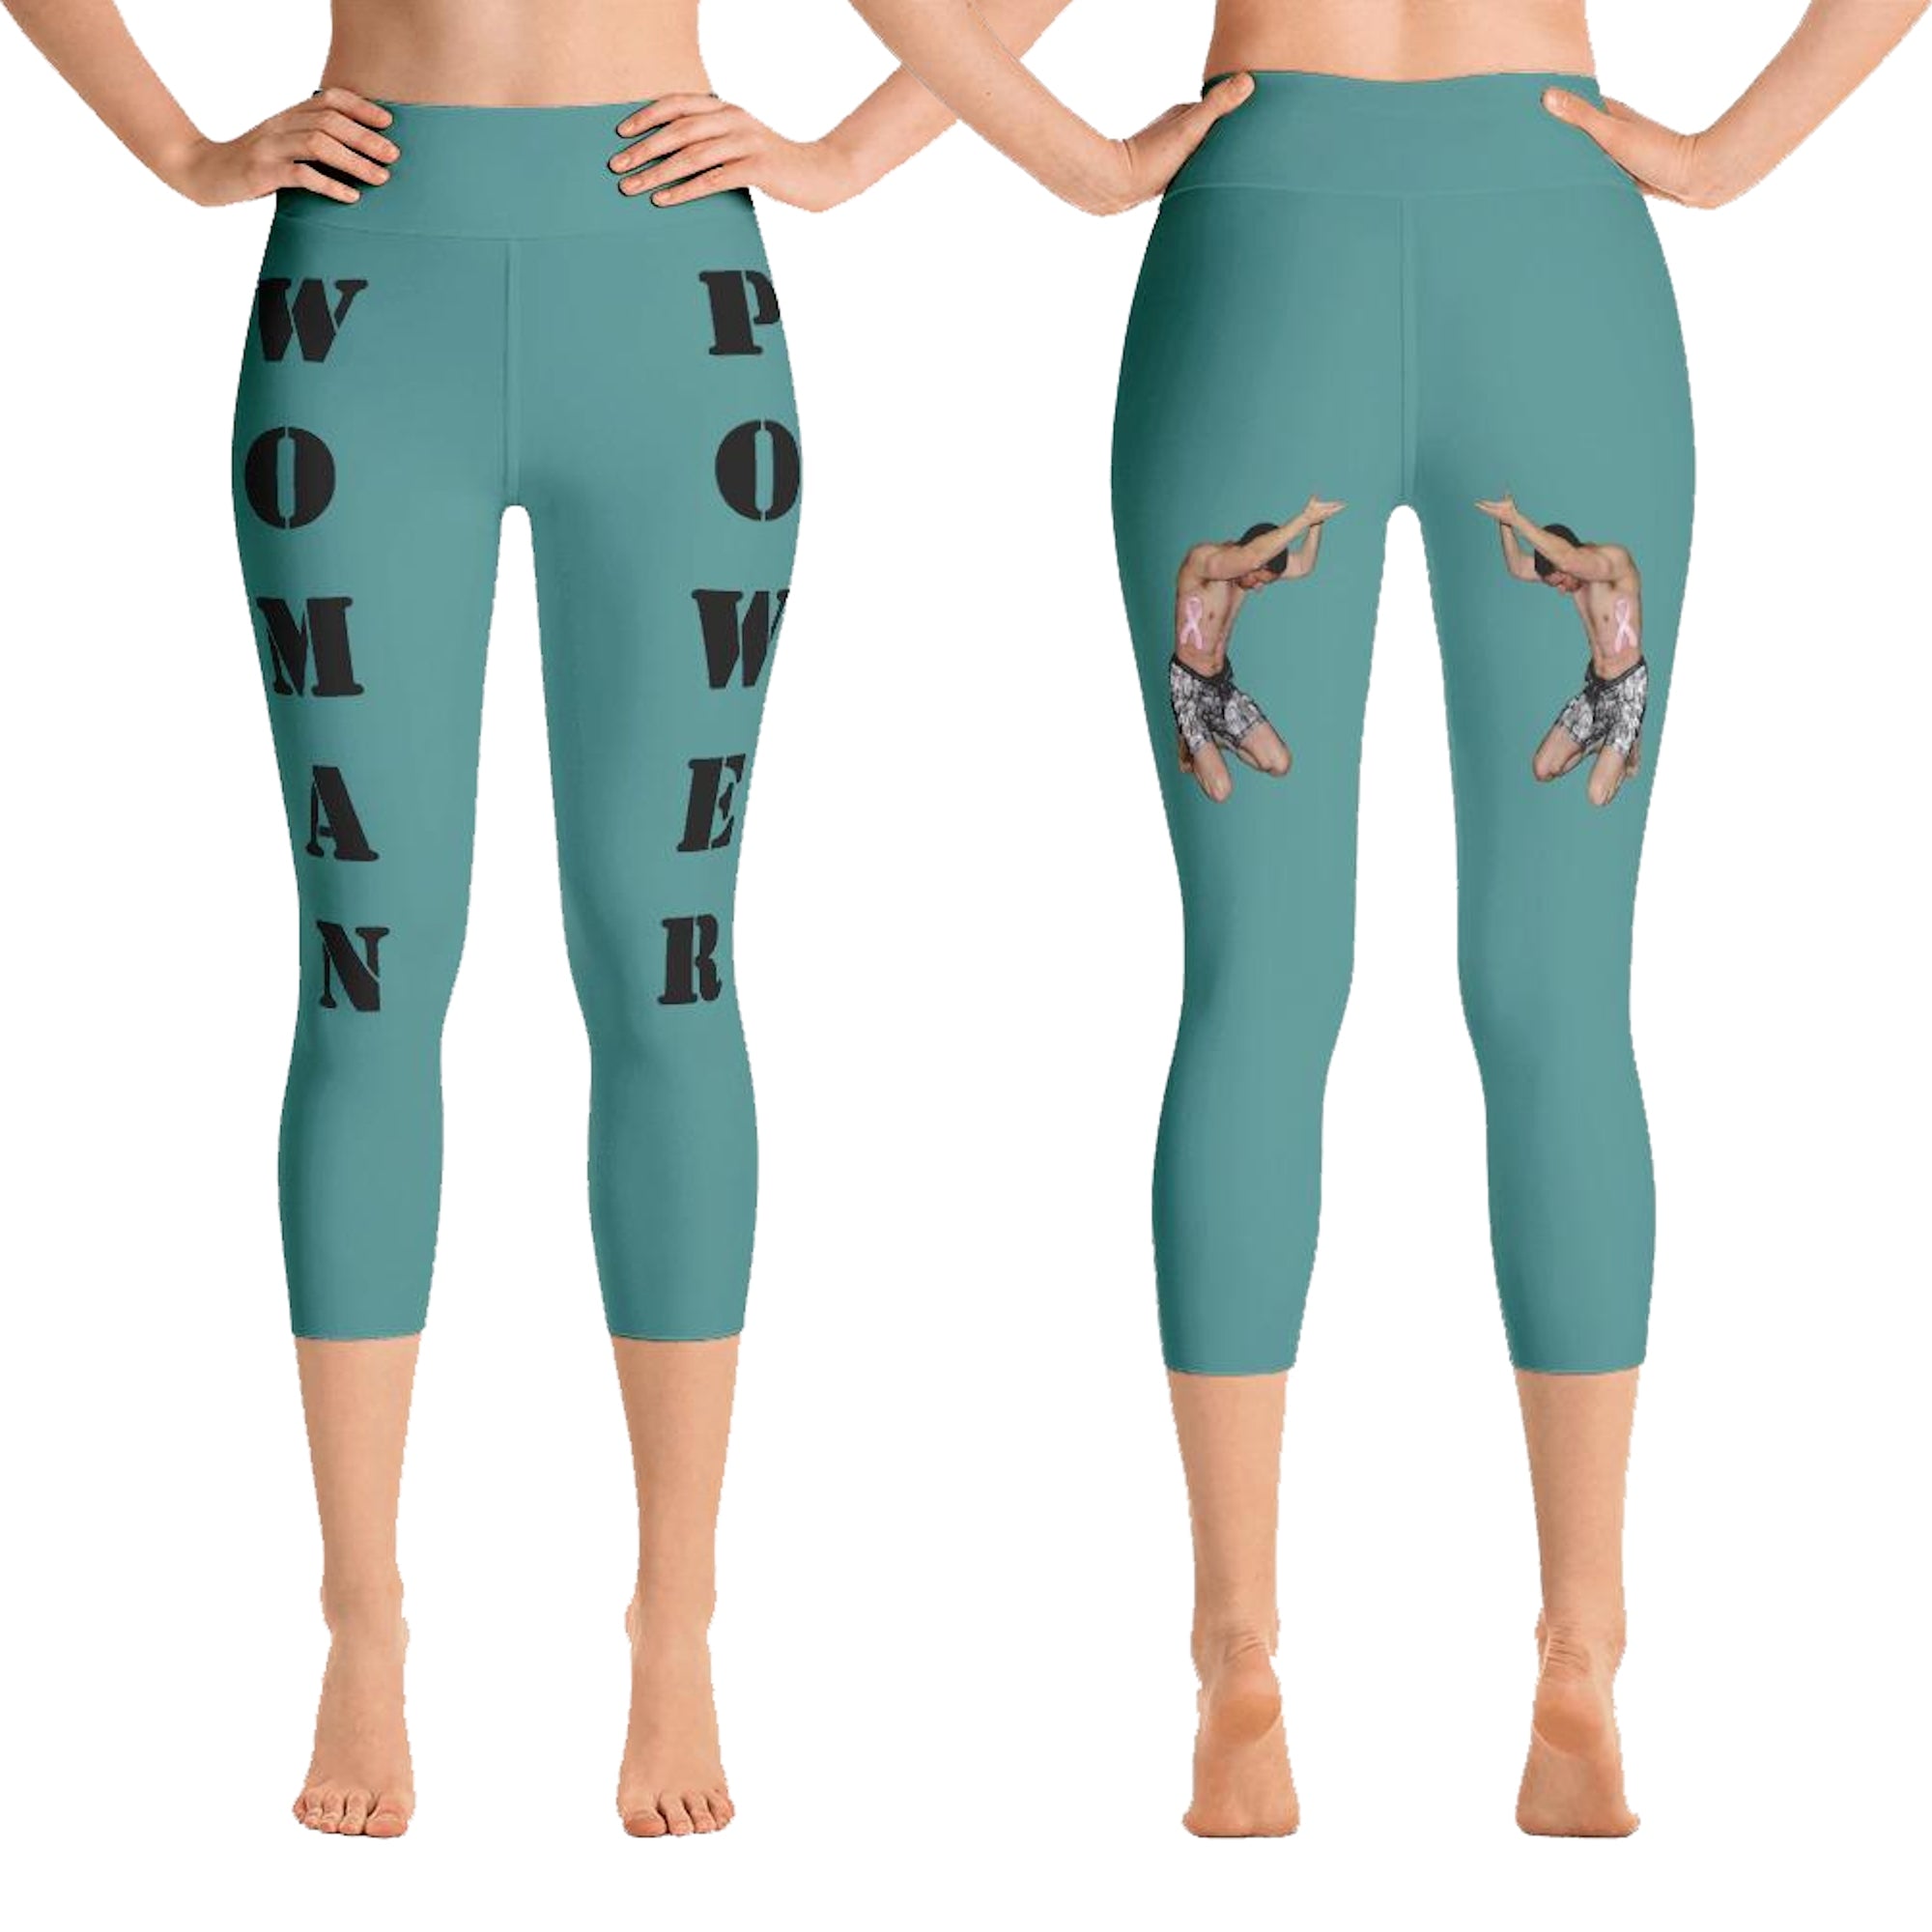 Our best viral yoga capri leggings with woman power - Teal Color with Black Letters